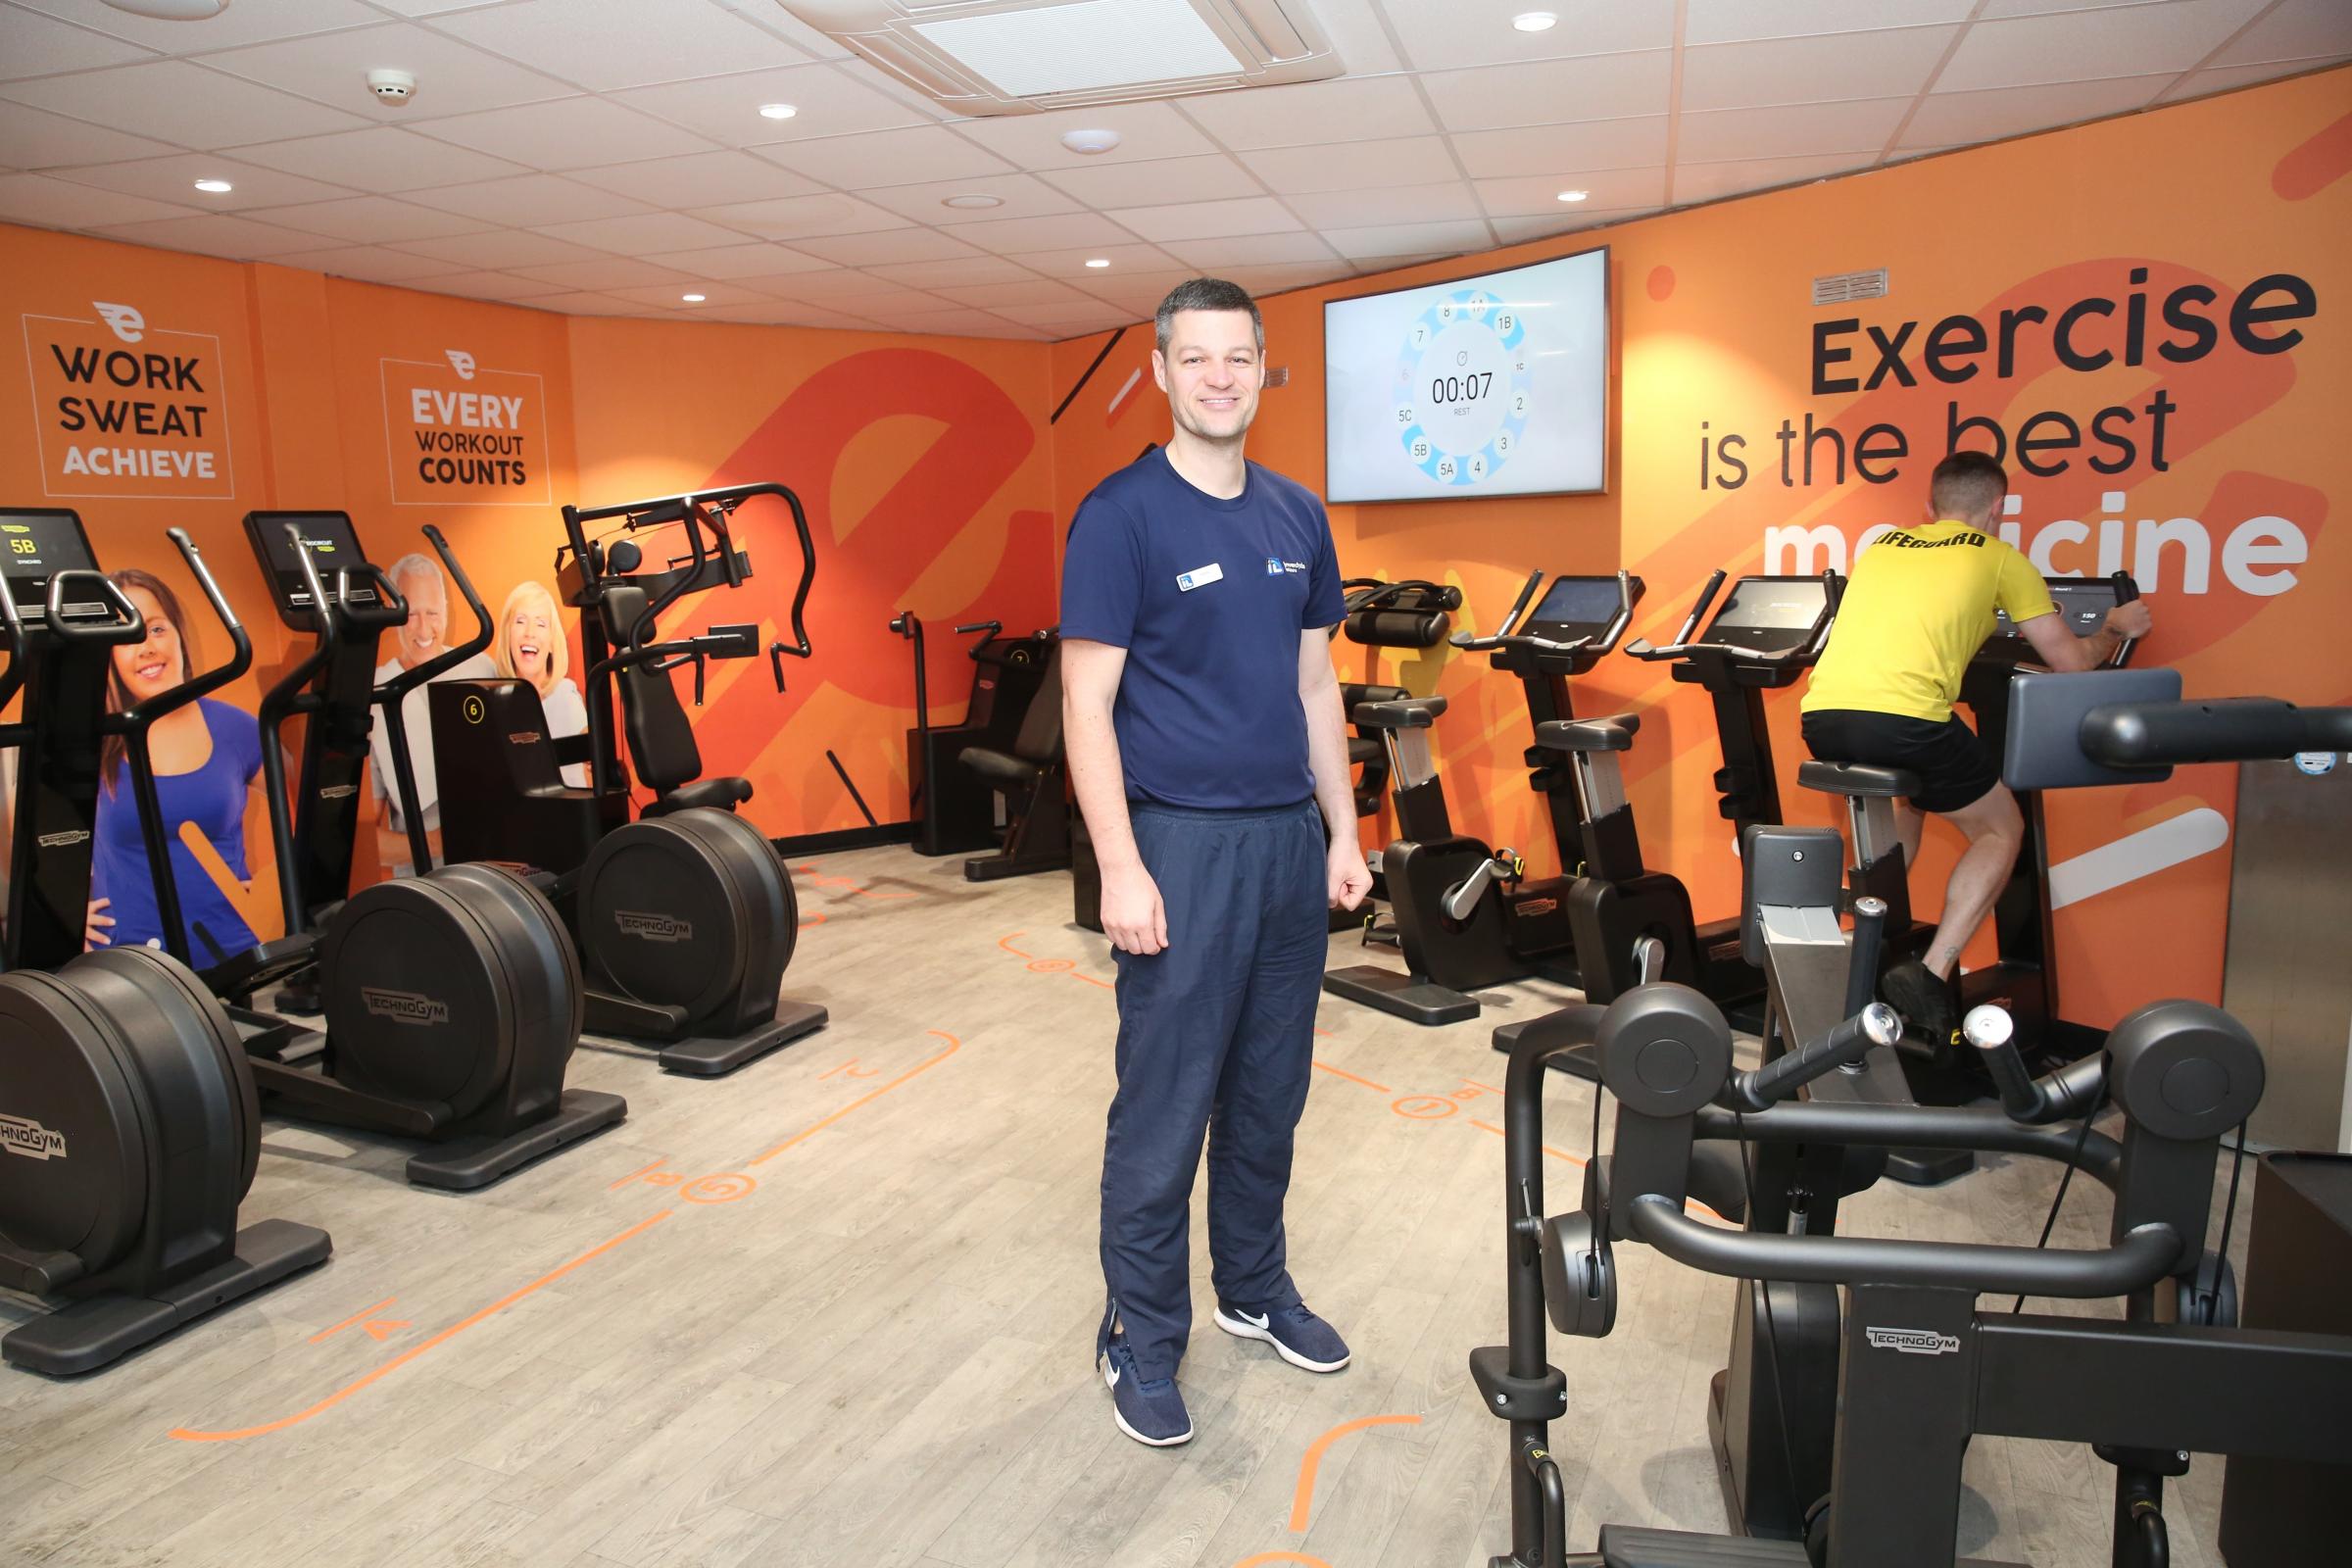 New 150k Gym Opens In Port Glasgow Greenock Telegraph Images, Photos, Reviews